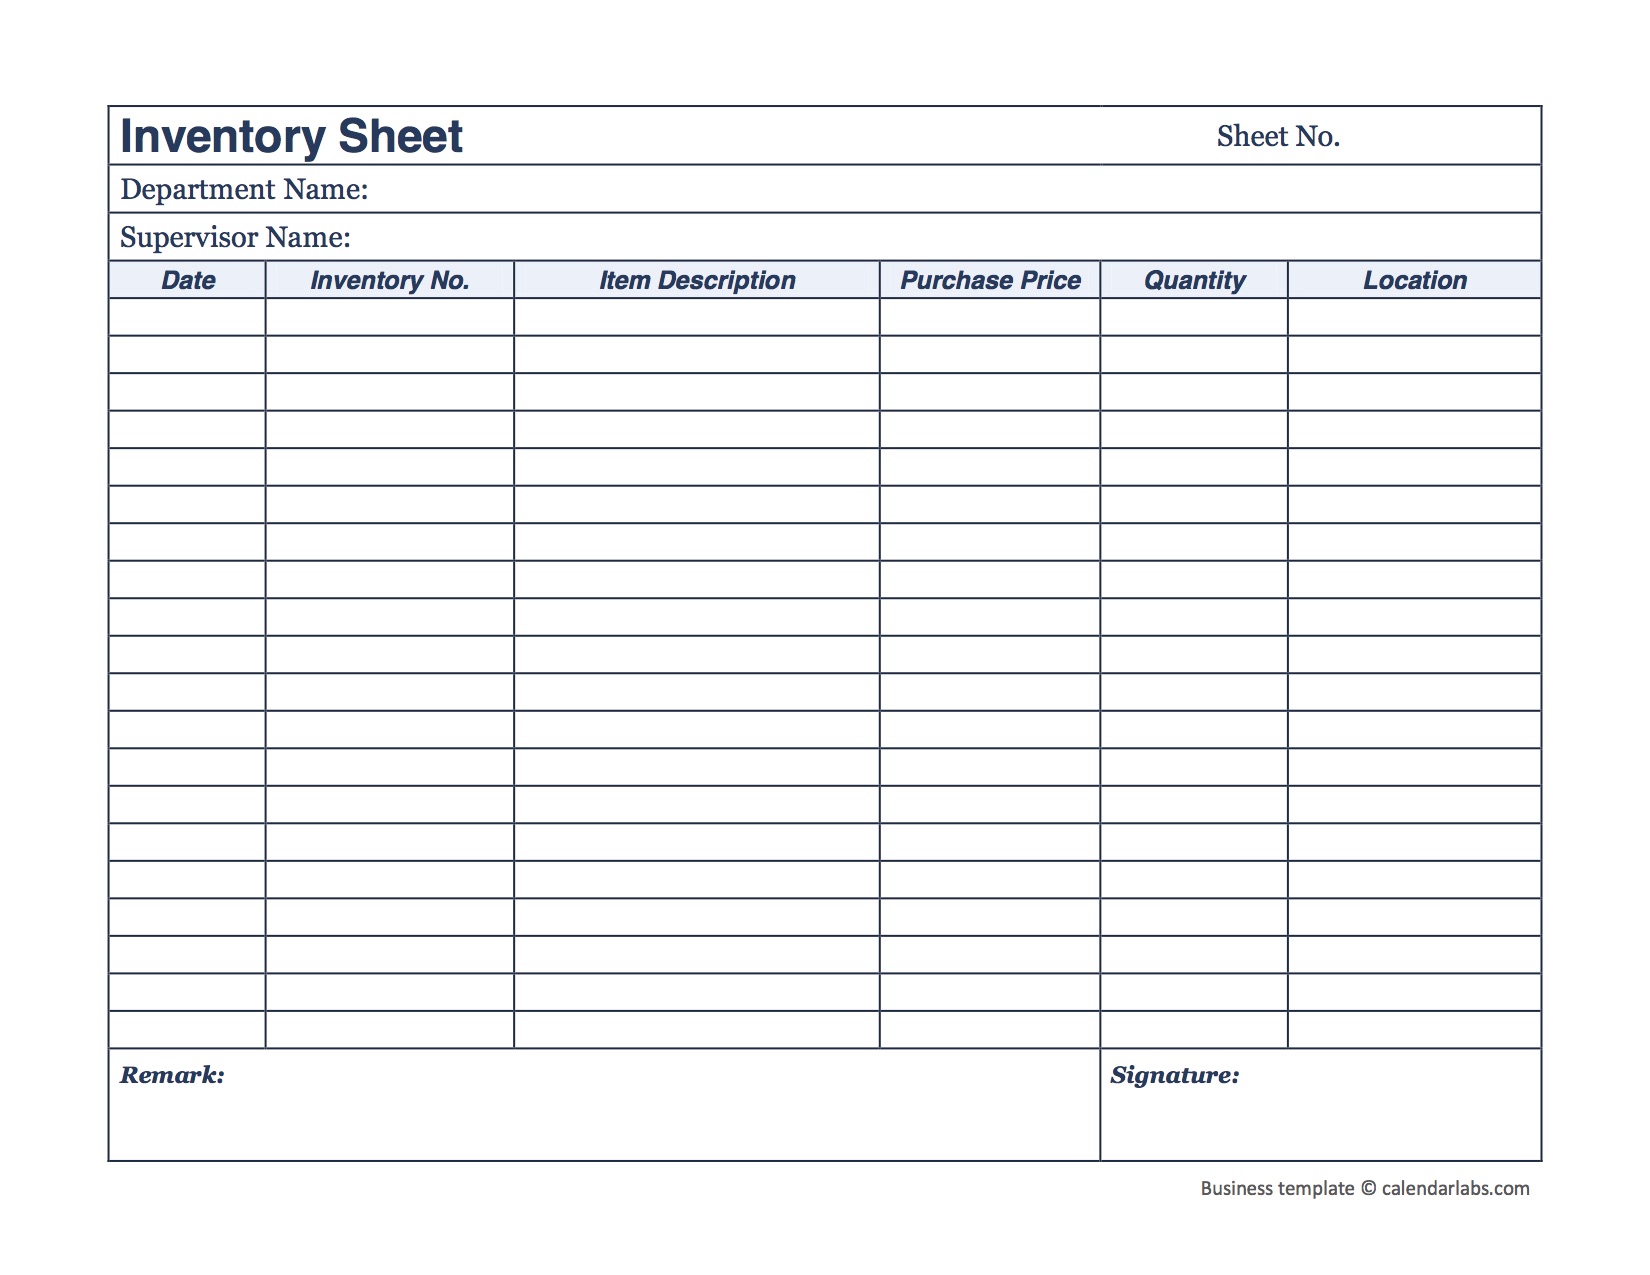 business-inventory-template-2019-free-printable-templates